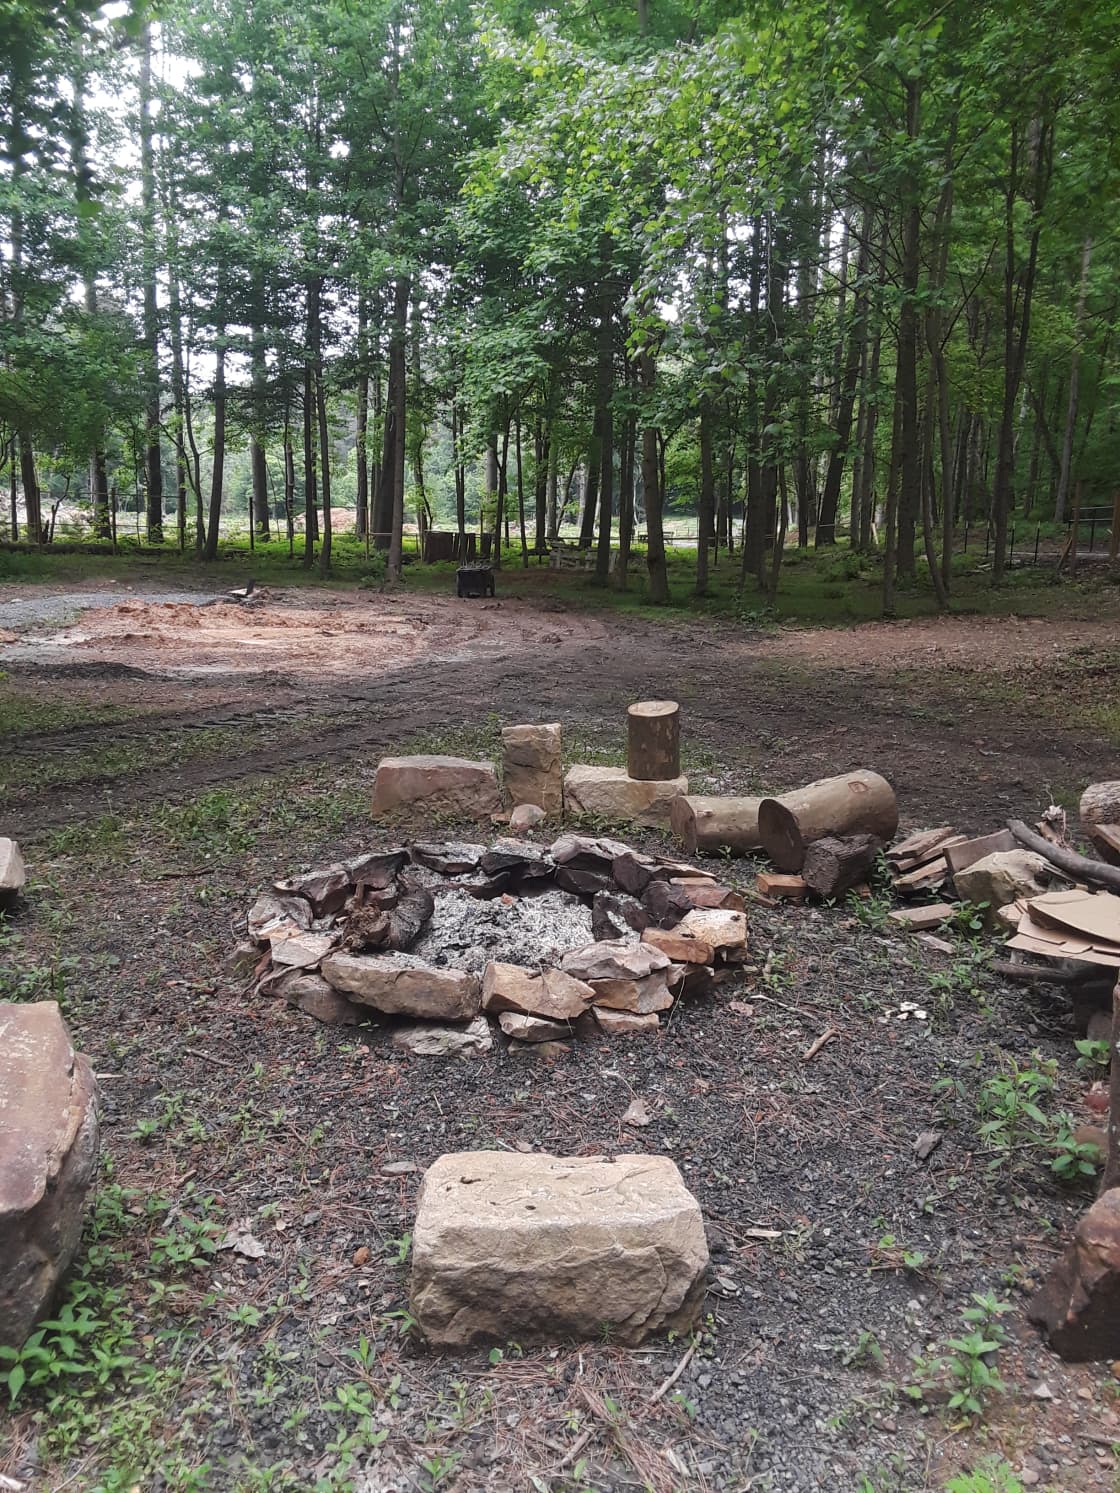 The firepit